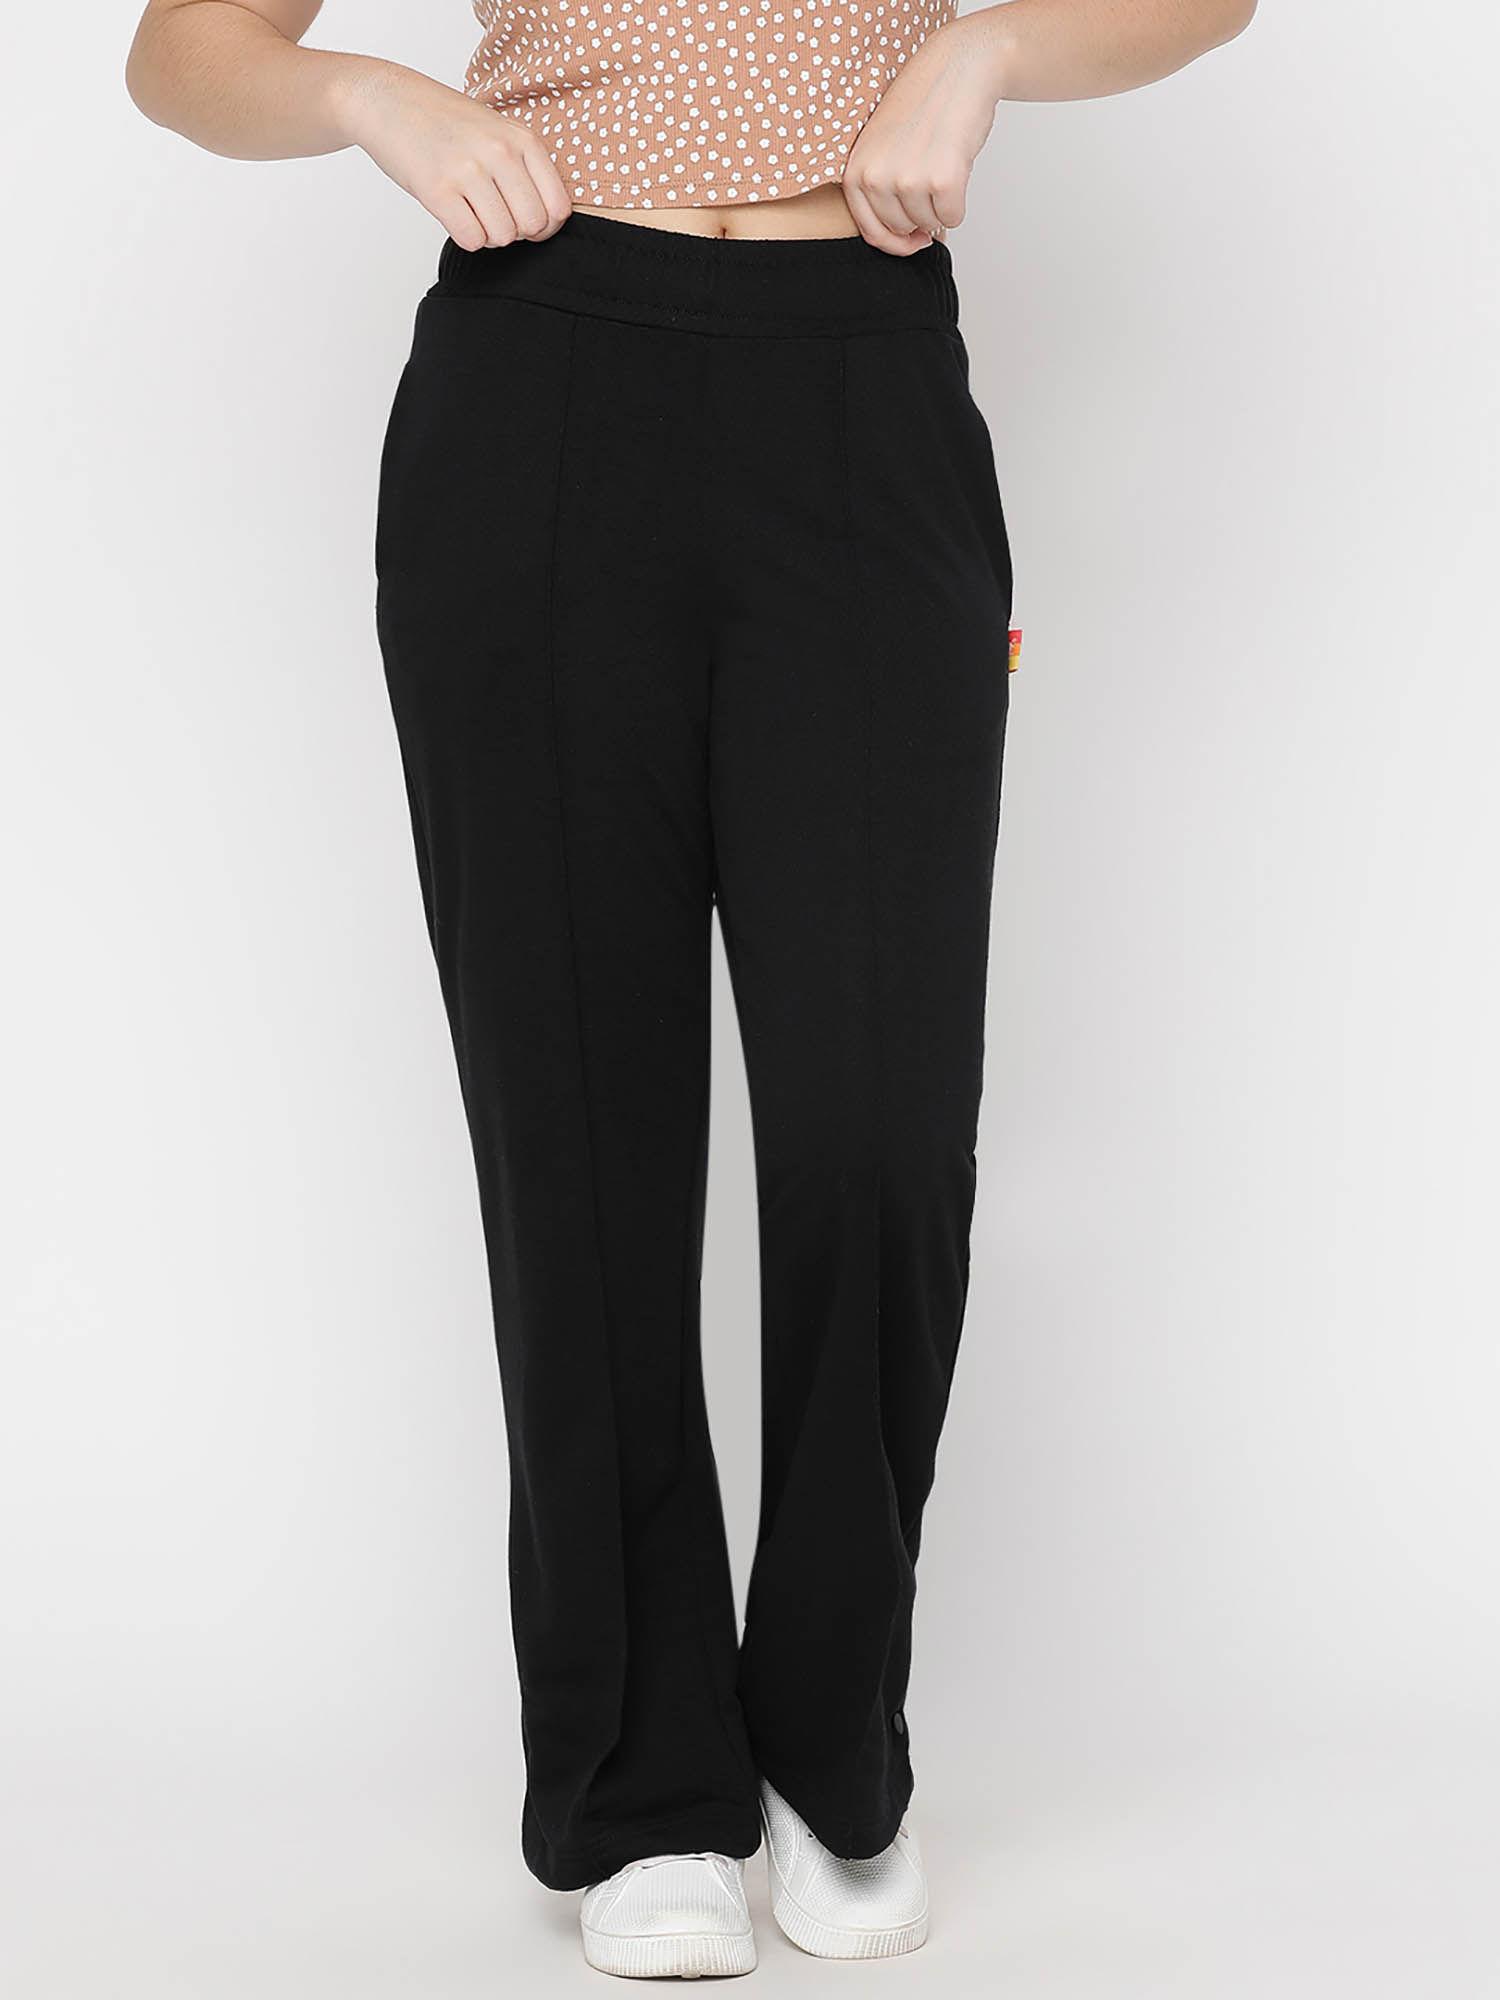 Girls Solid Light Weight Cotton Looper Flared Trackpants Black